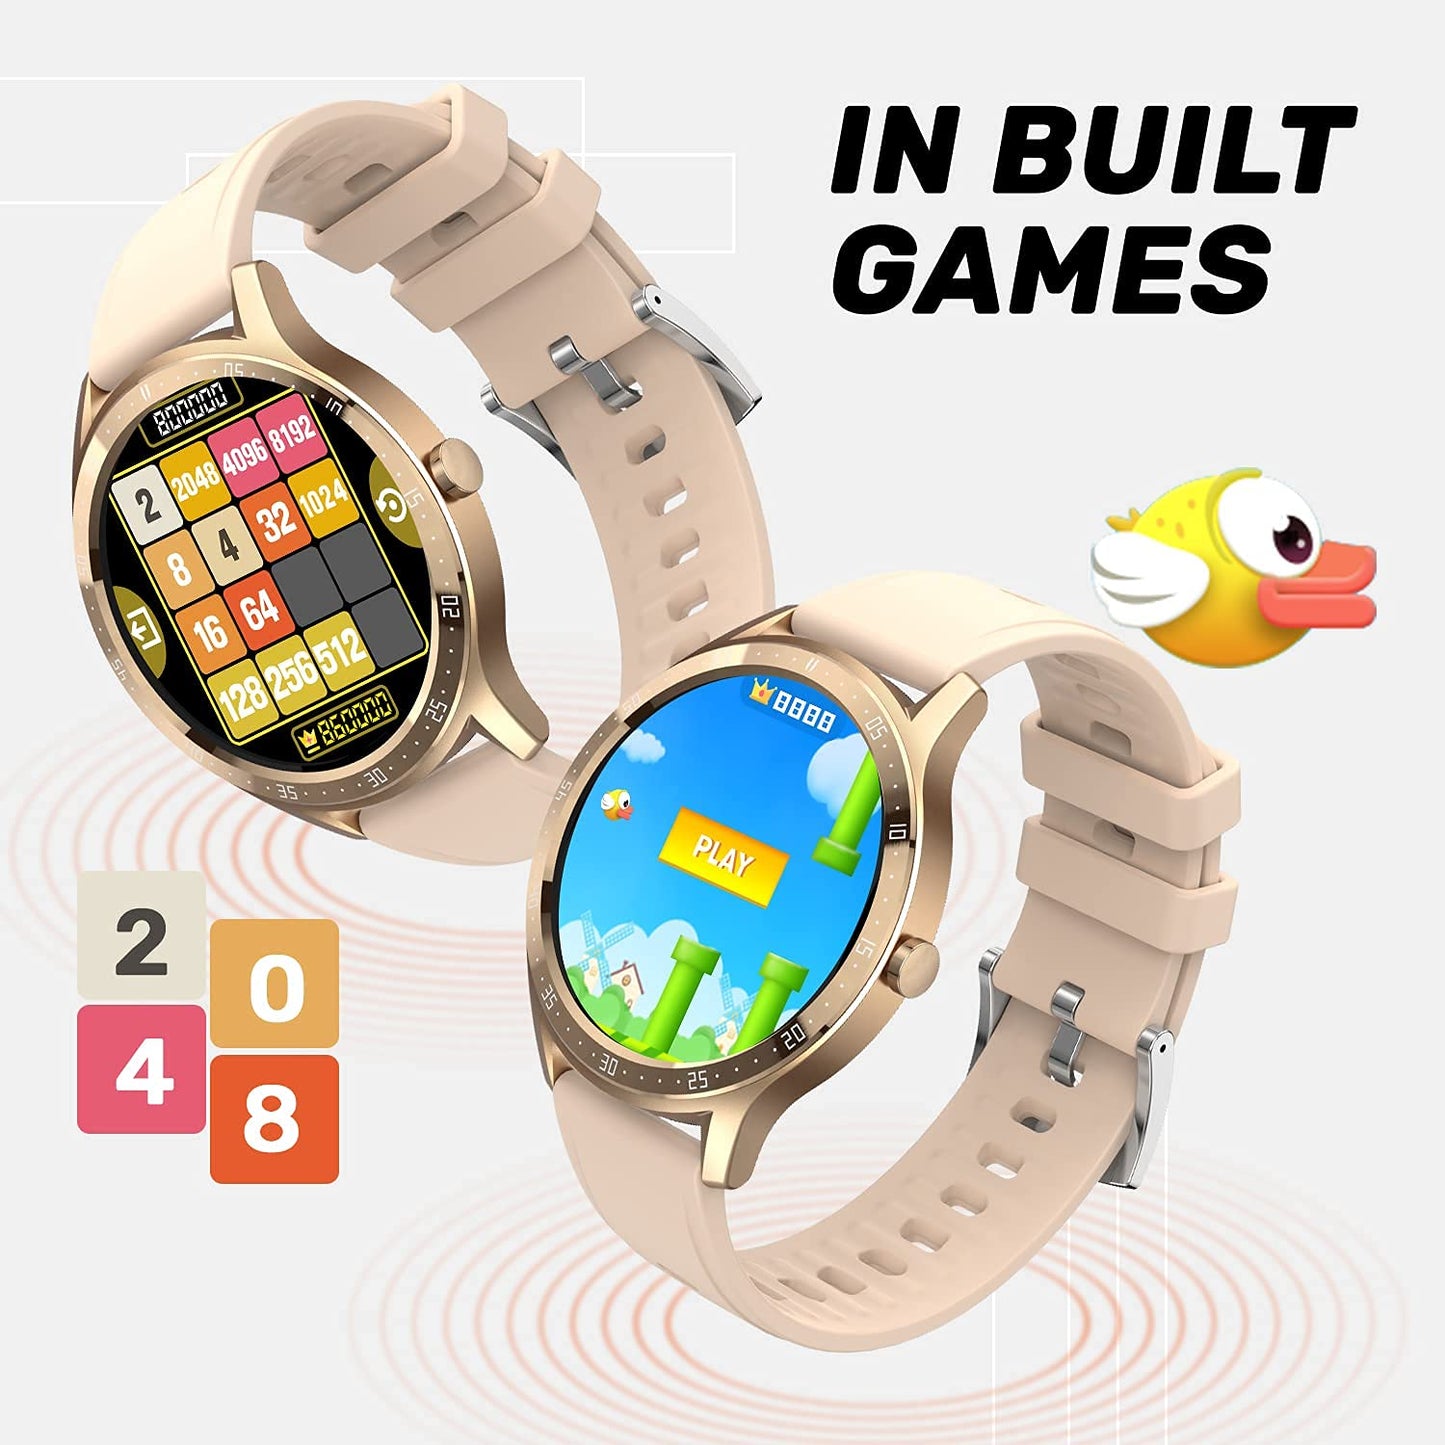 (Refurbished) Fire-Boltt 360 SpO2 Full Touch Large Display Round Smart Watch with in-Built Games, 8 Days Battery Life, IP67 Water Resistant with Blood Oxygen and Heart Rate Monitoring (Gold) (BSW003)